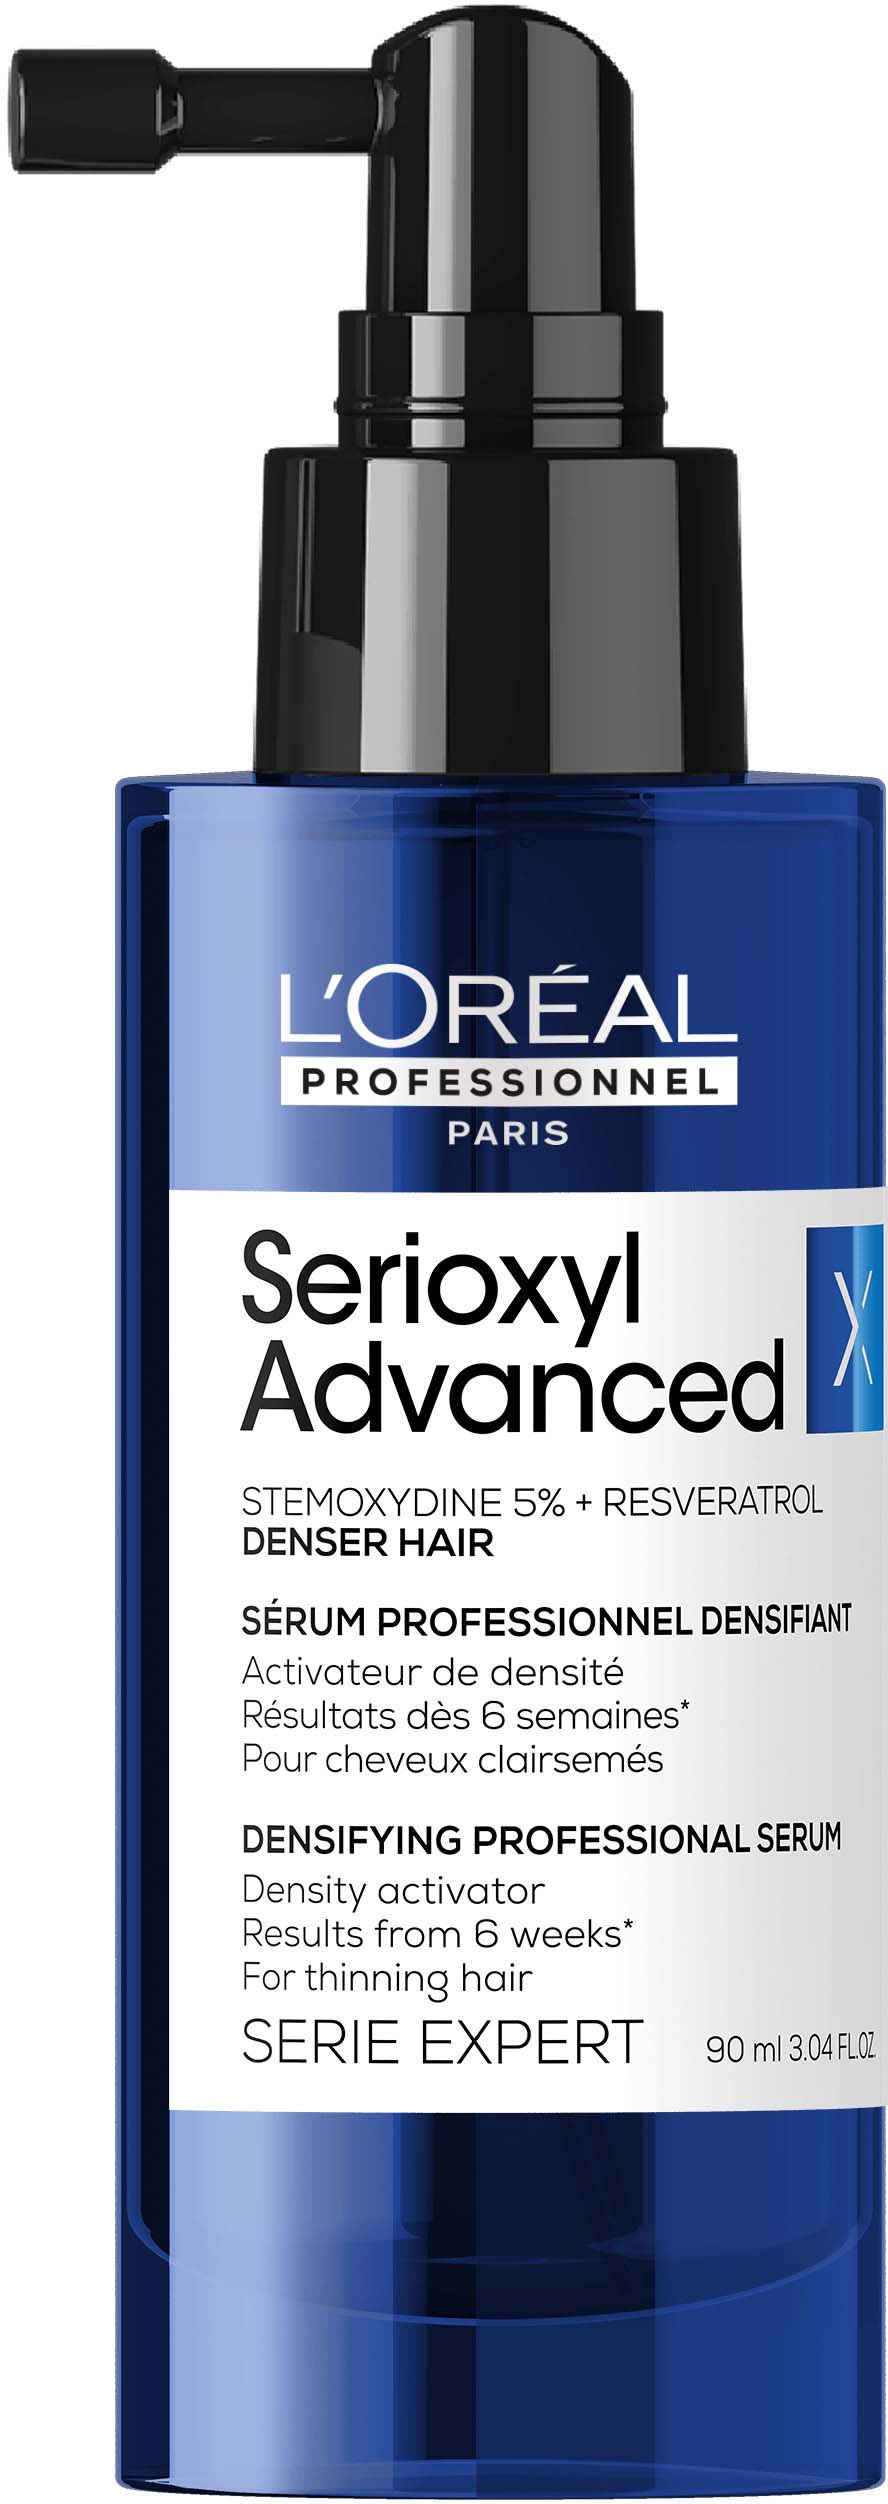 Buy LOreal Professionnel XTenso Care Straight Serum Online at Best Price  of Rs 600  bigbasket